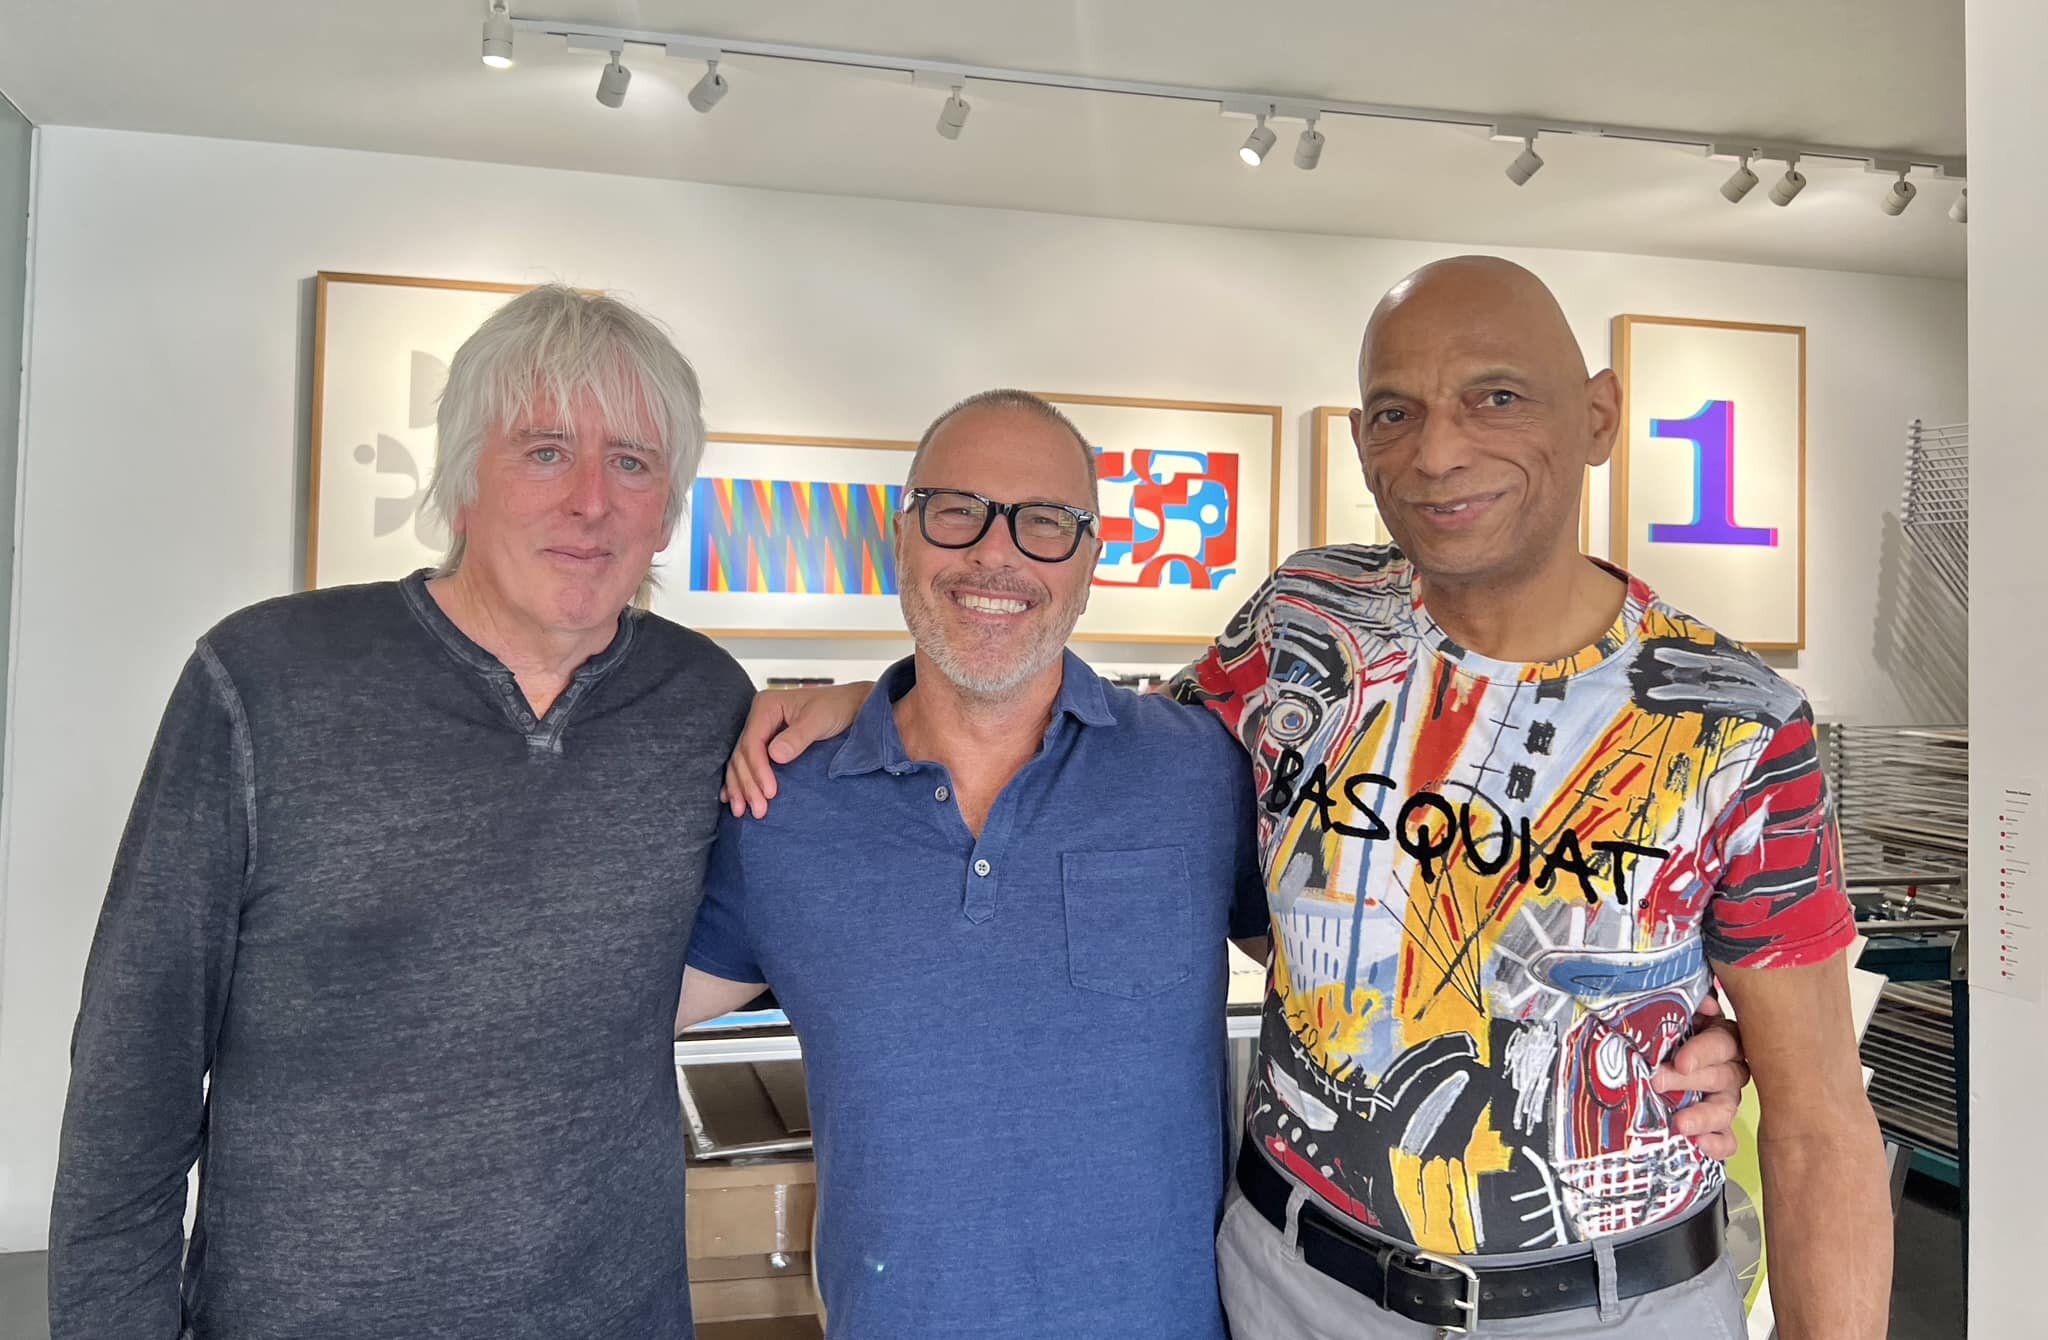 Meet a couple of my favorite Artist friends, Gary Wexler and Samuel Fleming Lewis! Love there guys, and congrats on your Untitled show at Backstreet!